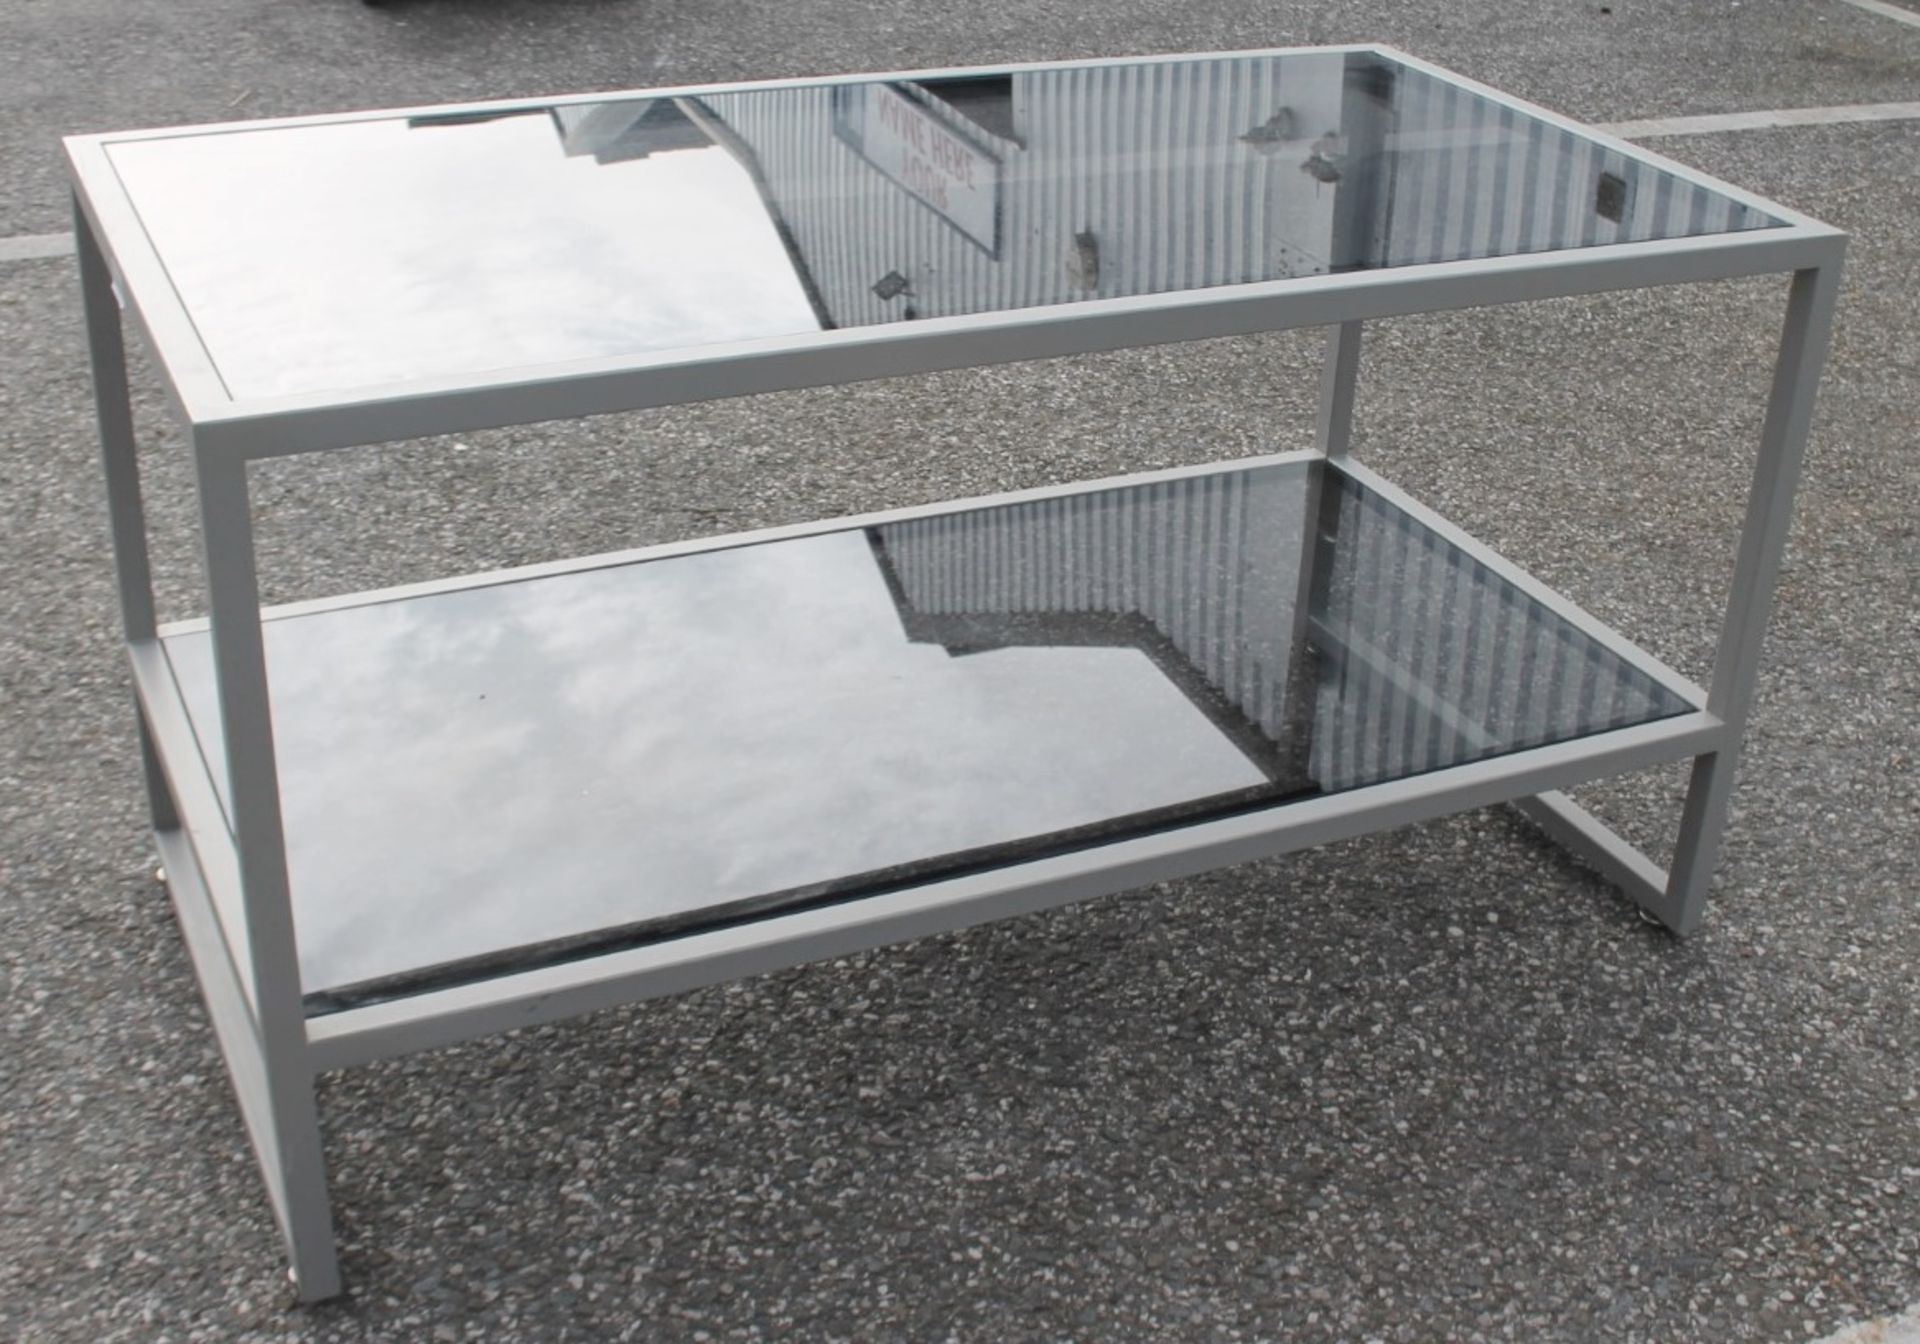 1 x Commercial Display Table With Tinted Glass Top And Undershelf - Image 4 of 4